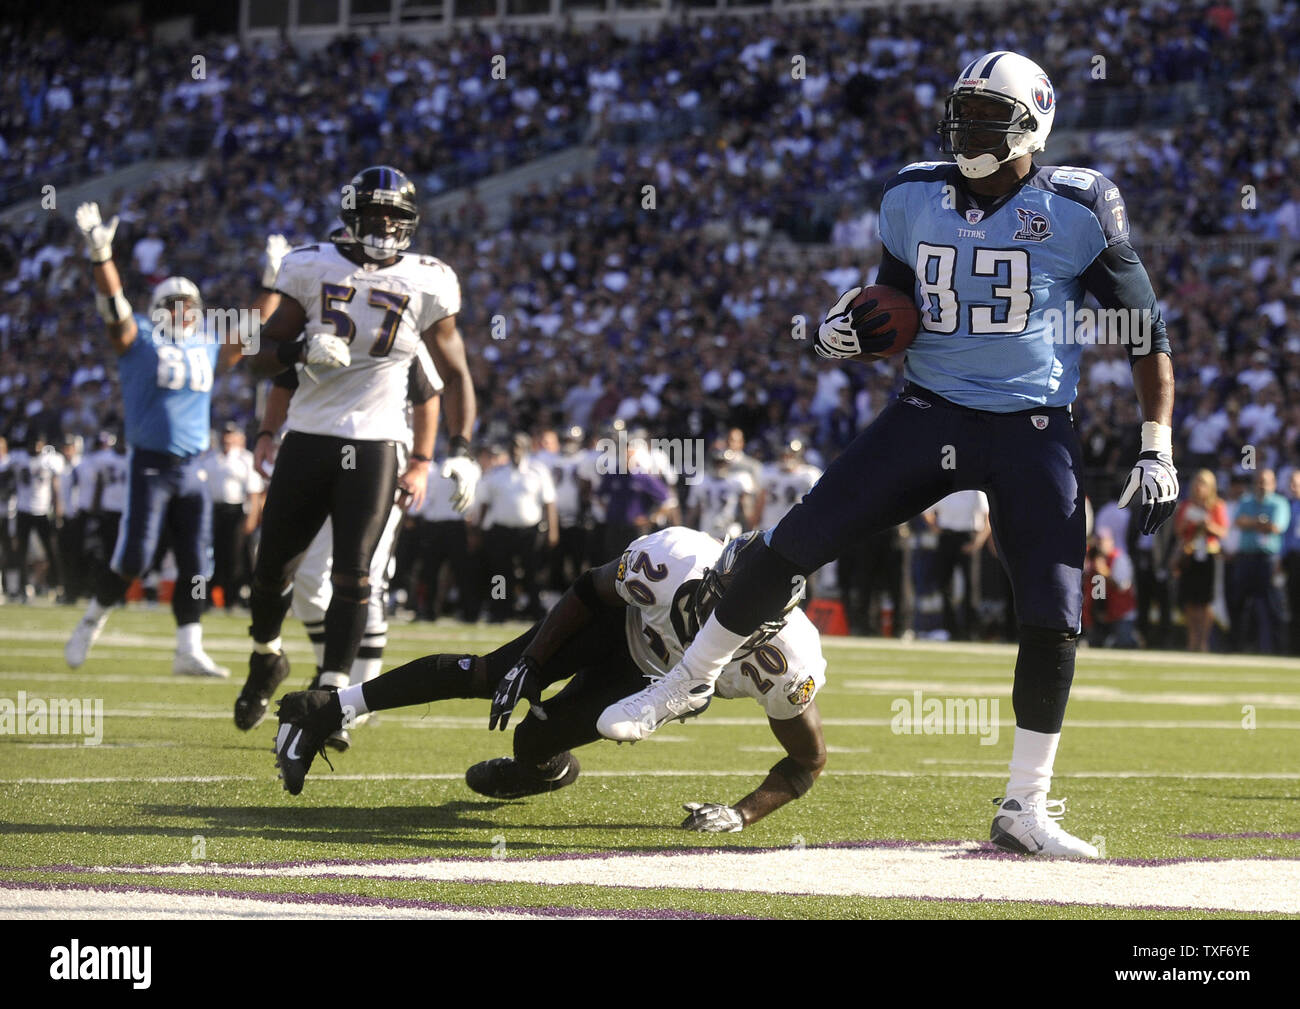 Tennessee Titans tight end Alge Crumpler (83) catches an 11-yard pass for a touchdown against the Baltimore Ravens in the 4th quarter  at M & T Bank Stadium in Baltimore on October 5, 2008. (UPI Photo/Kevin Dietsch) Stock Photo